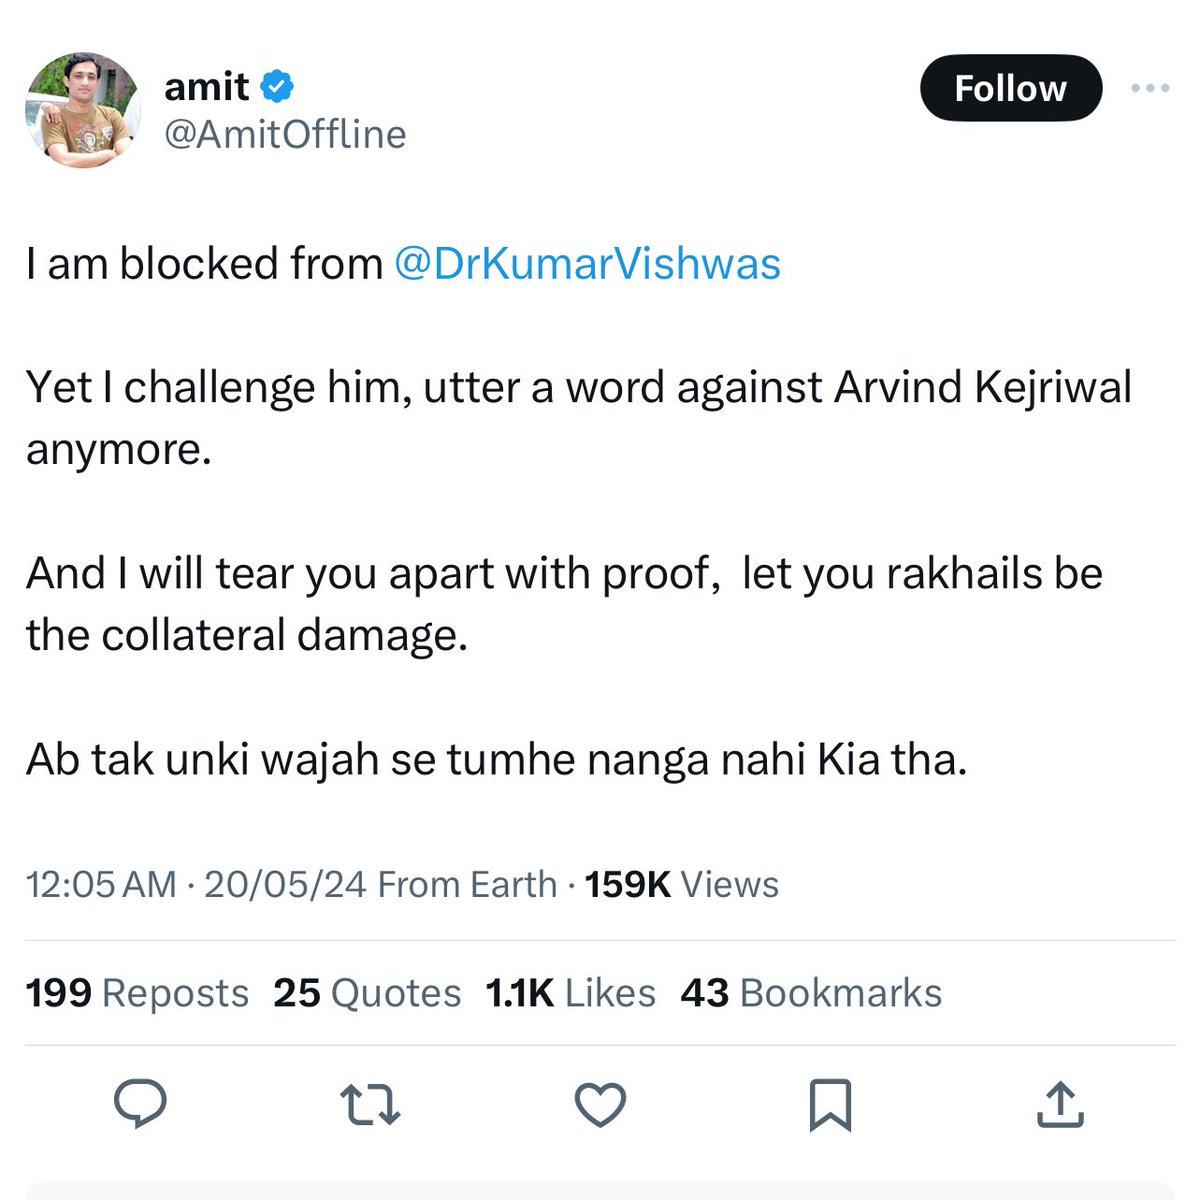 Arvind Kejriwal came to power by protesting against Sheila Dixit after Nirbhaya case. Today his supporters either assault Swati Maliwal or call women as “keep”.

Women empowerment, AAP Style 🙃